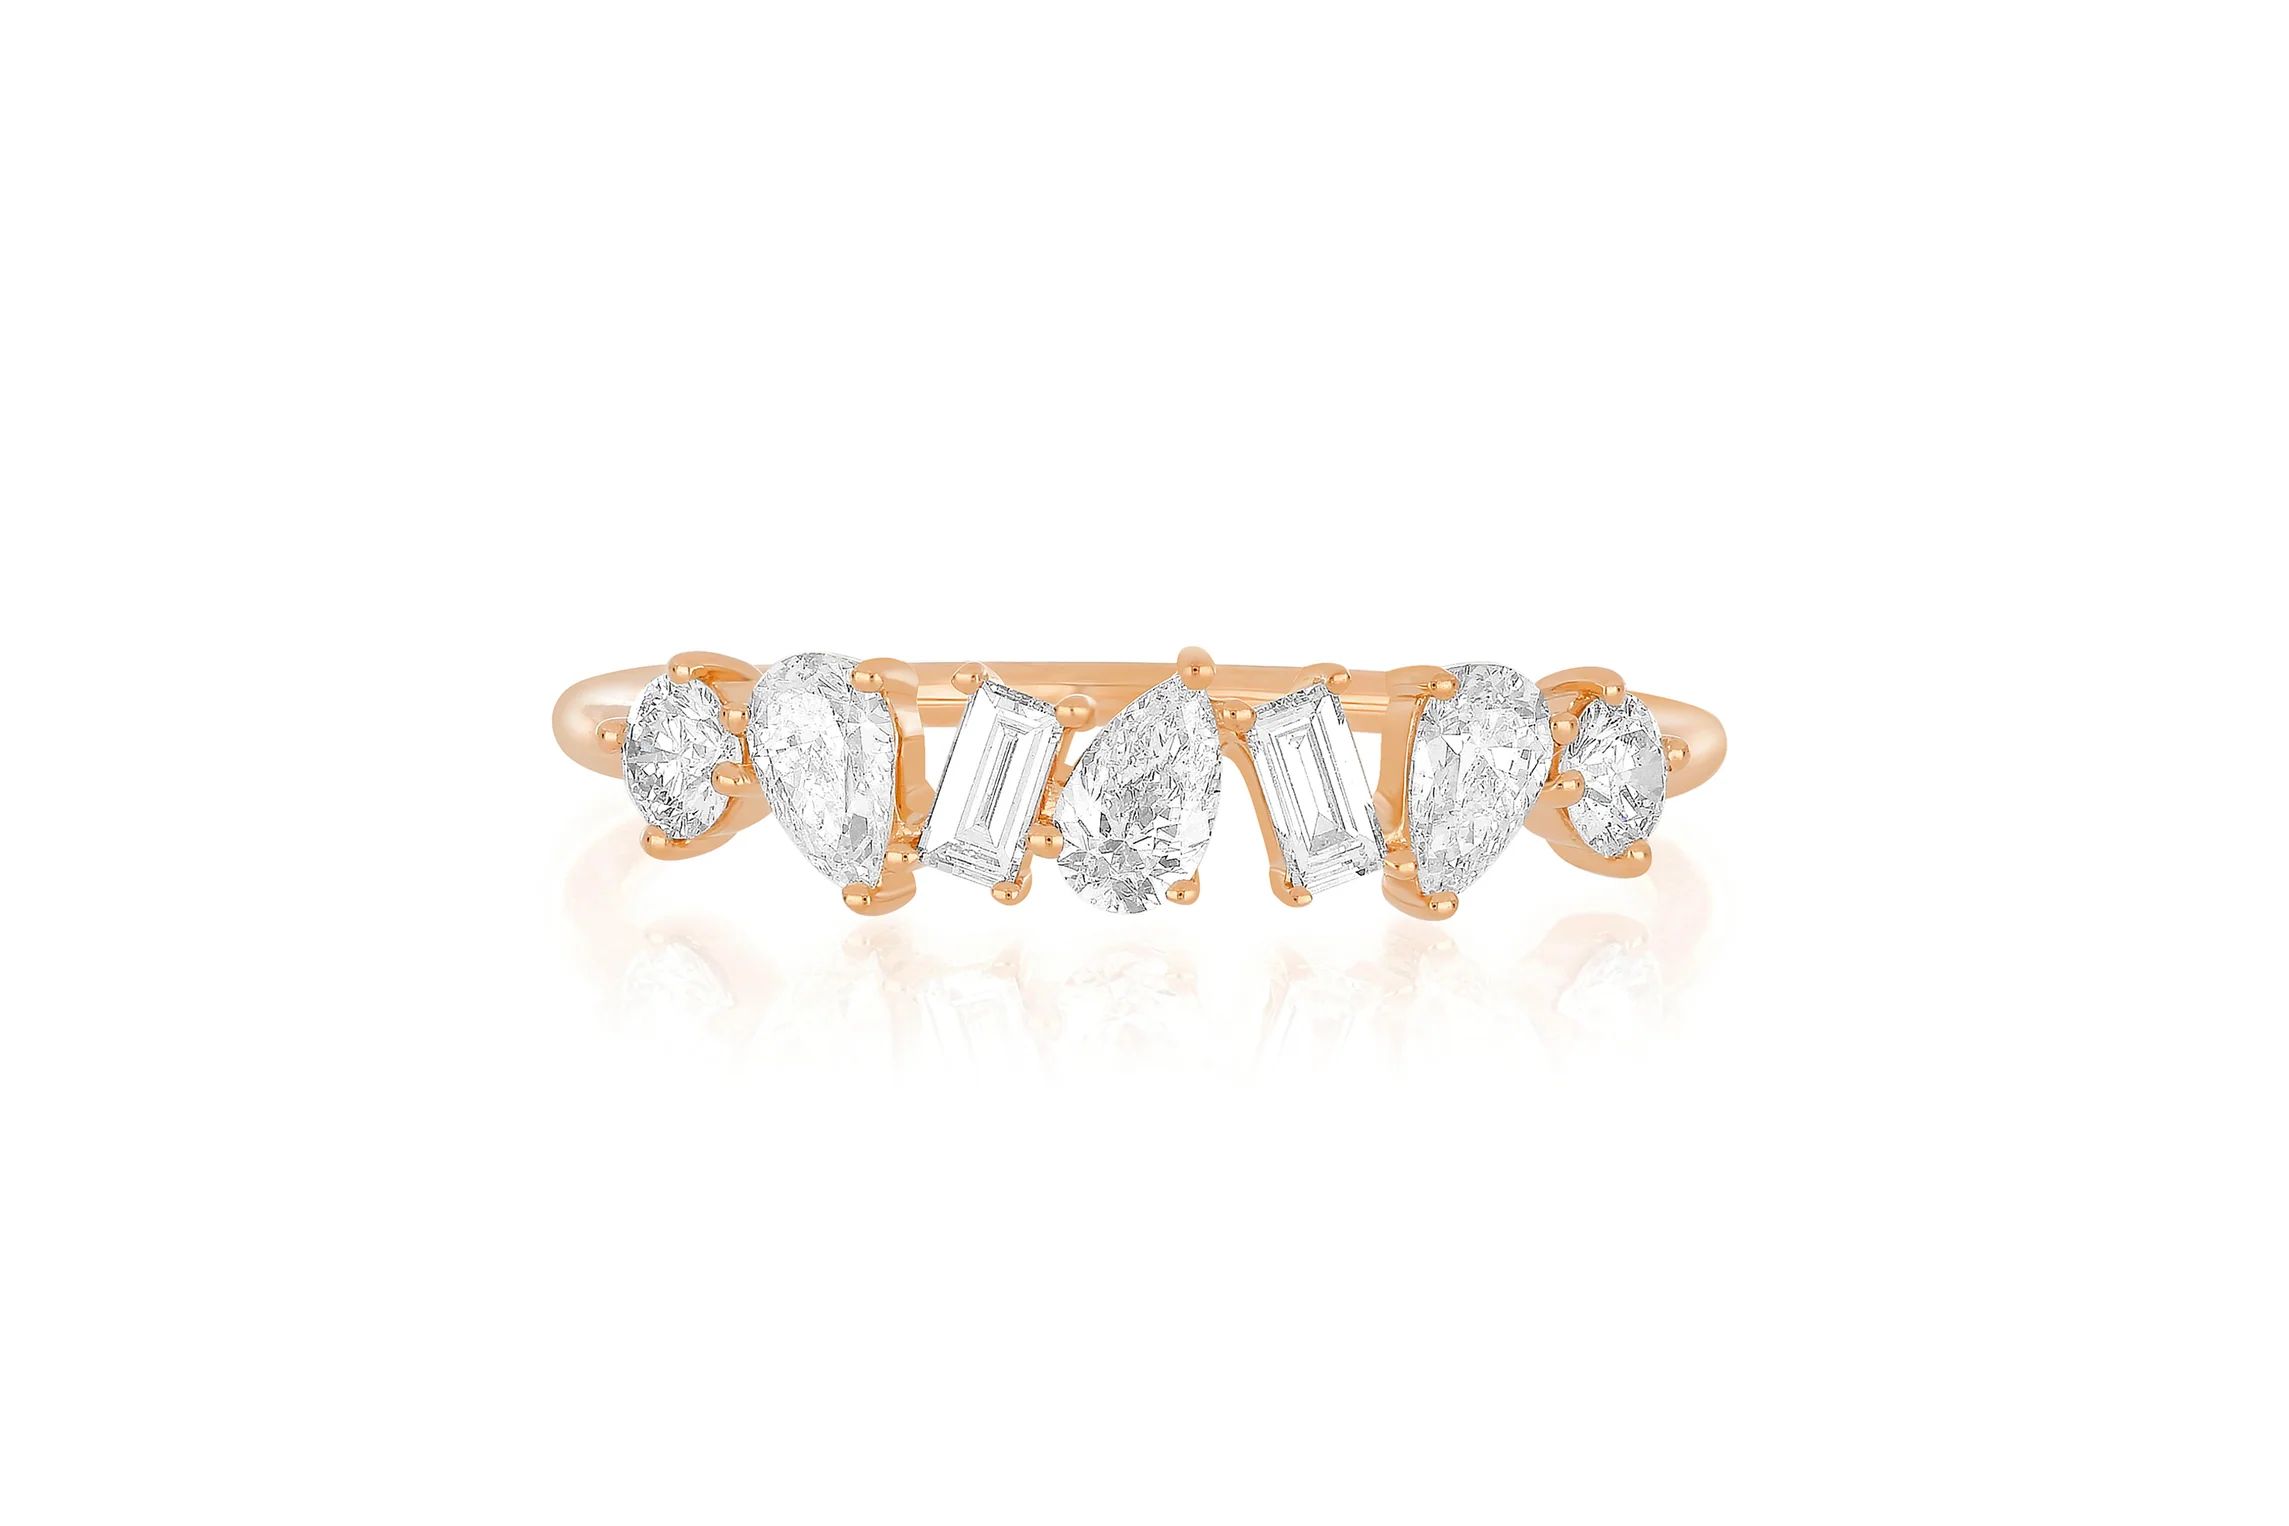 Jumbo Multi Faceted Diamond Ring | EF Collection